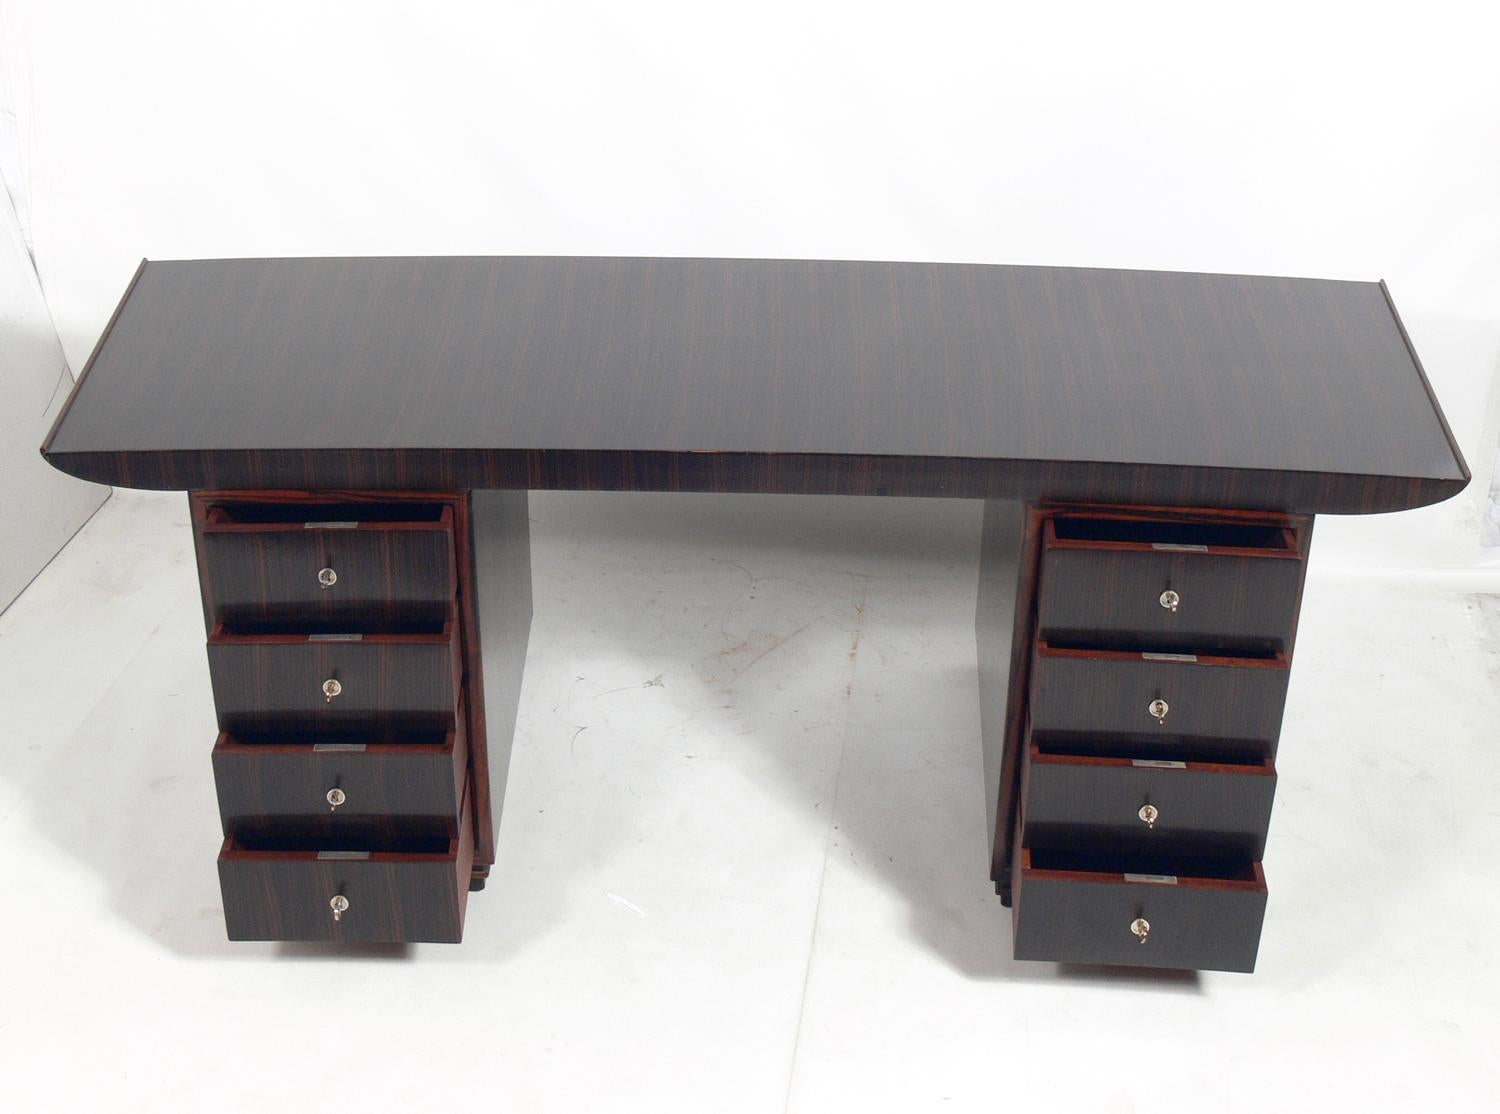 Plated French Art Deco Macassar Desk by Dominique